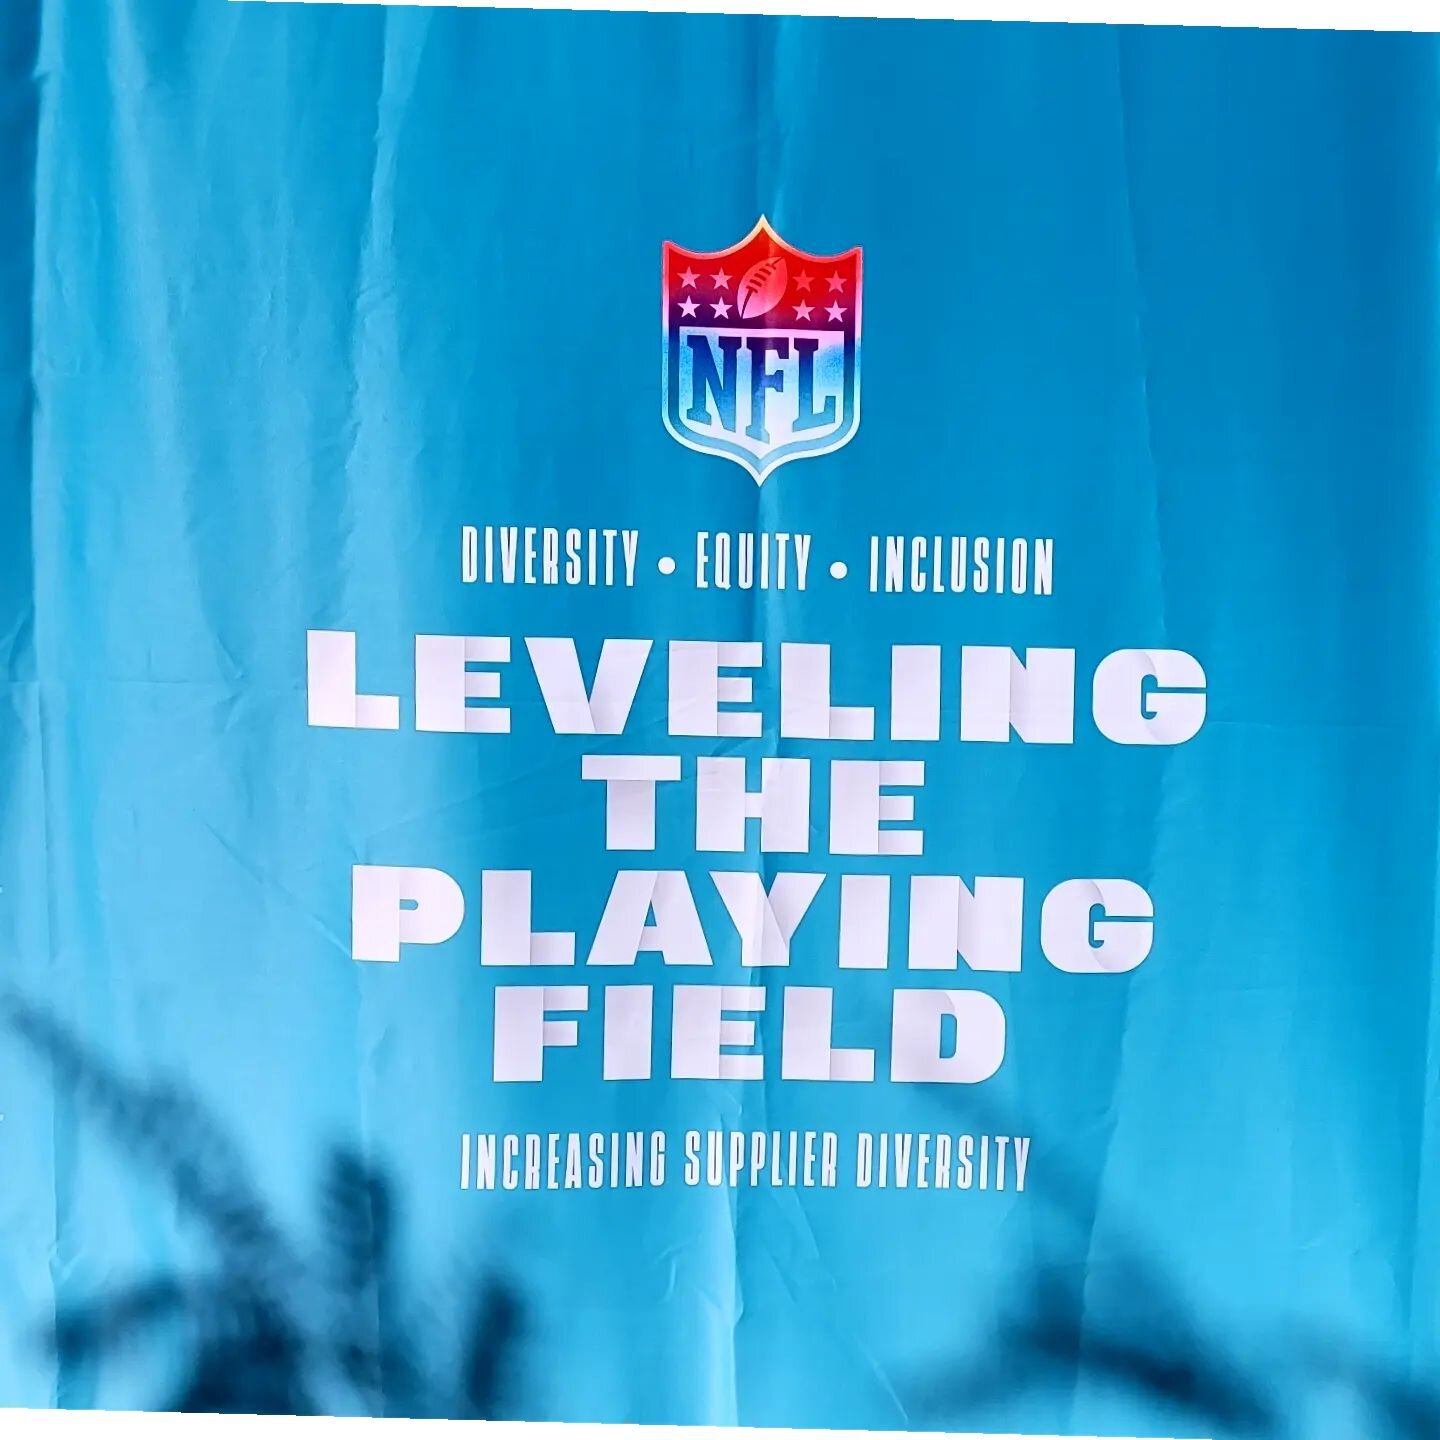 Today at the #nfl #diversityequityinclusion #mixer #levelingtheplayingfield 

#smallbusiness #wonen #owned  #leadership